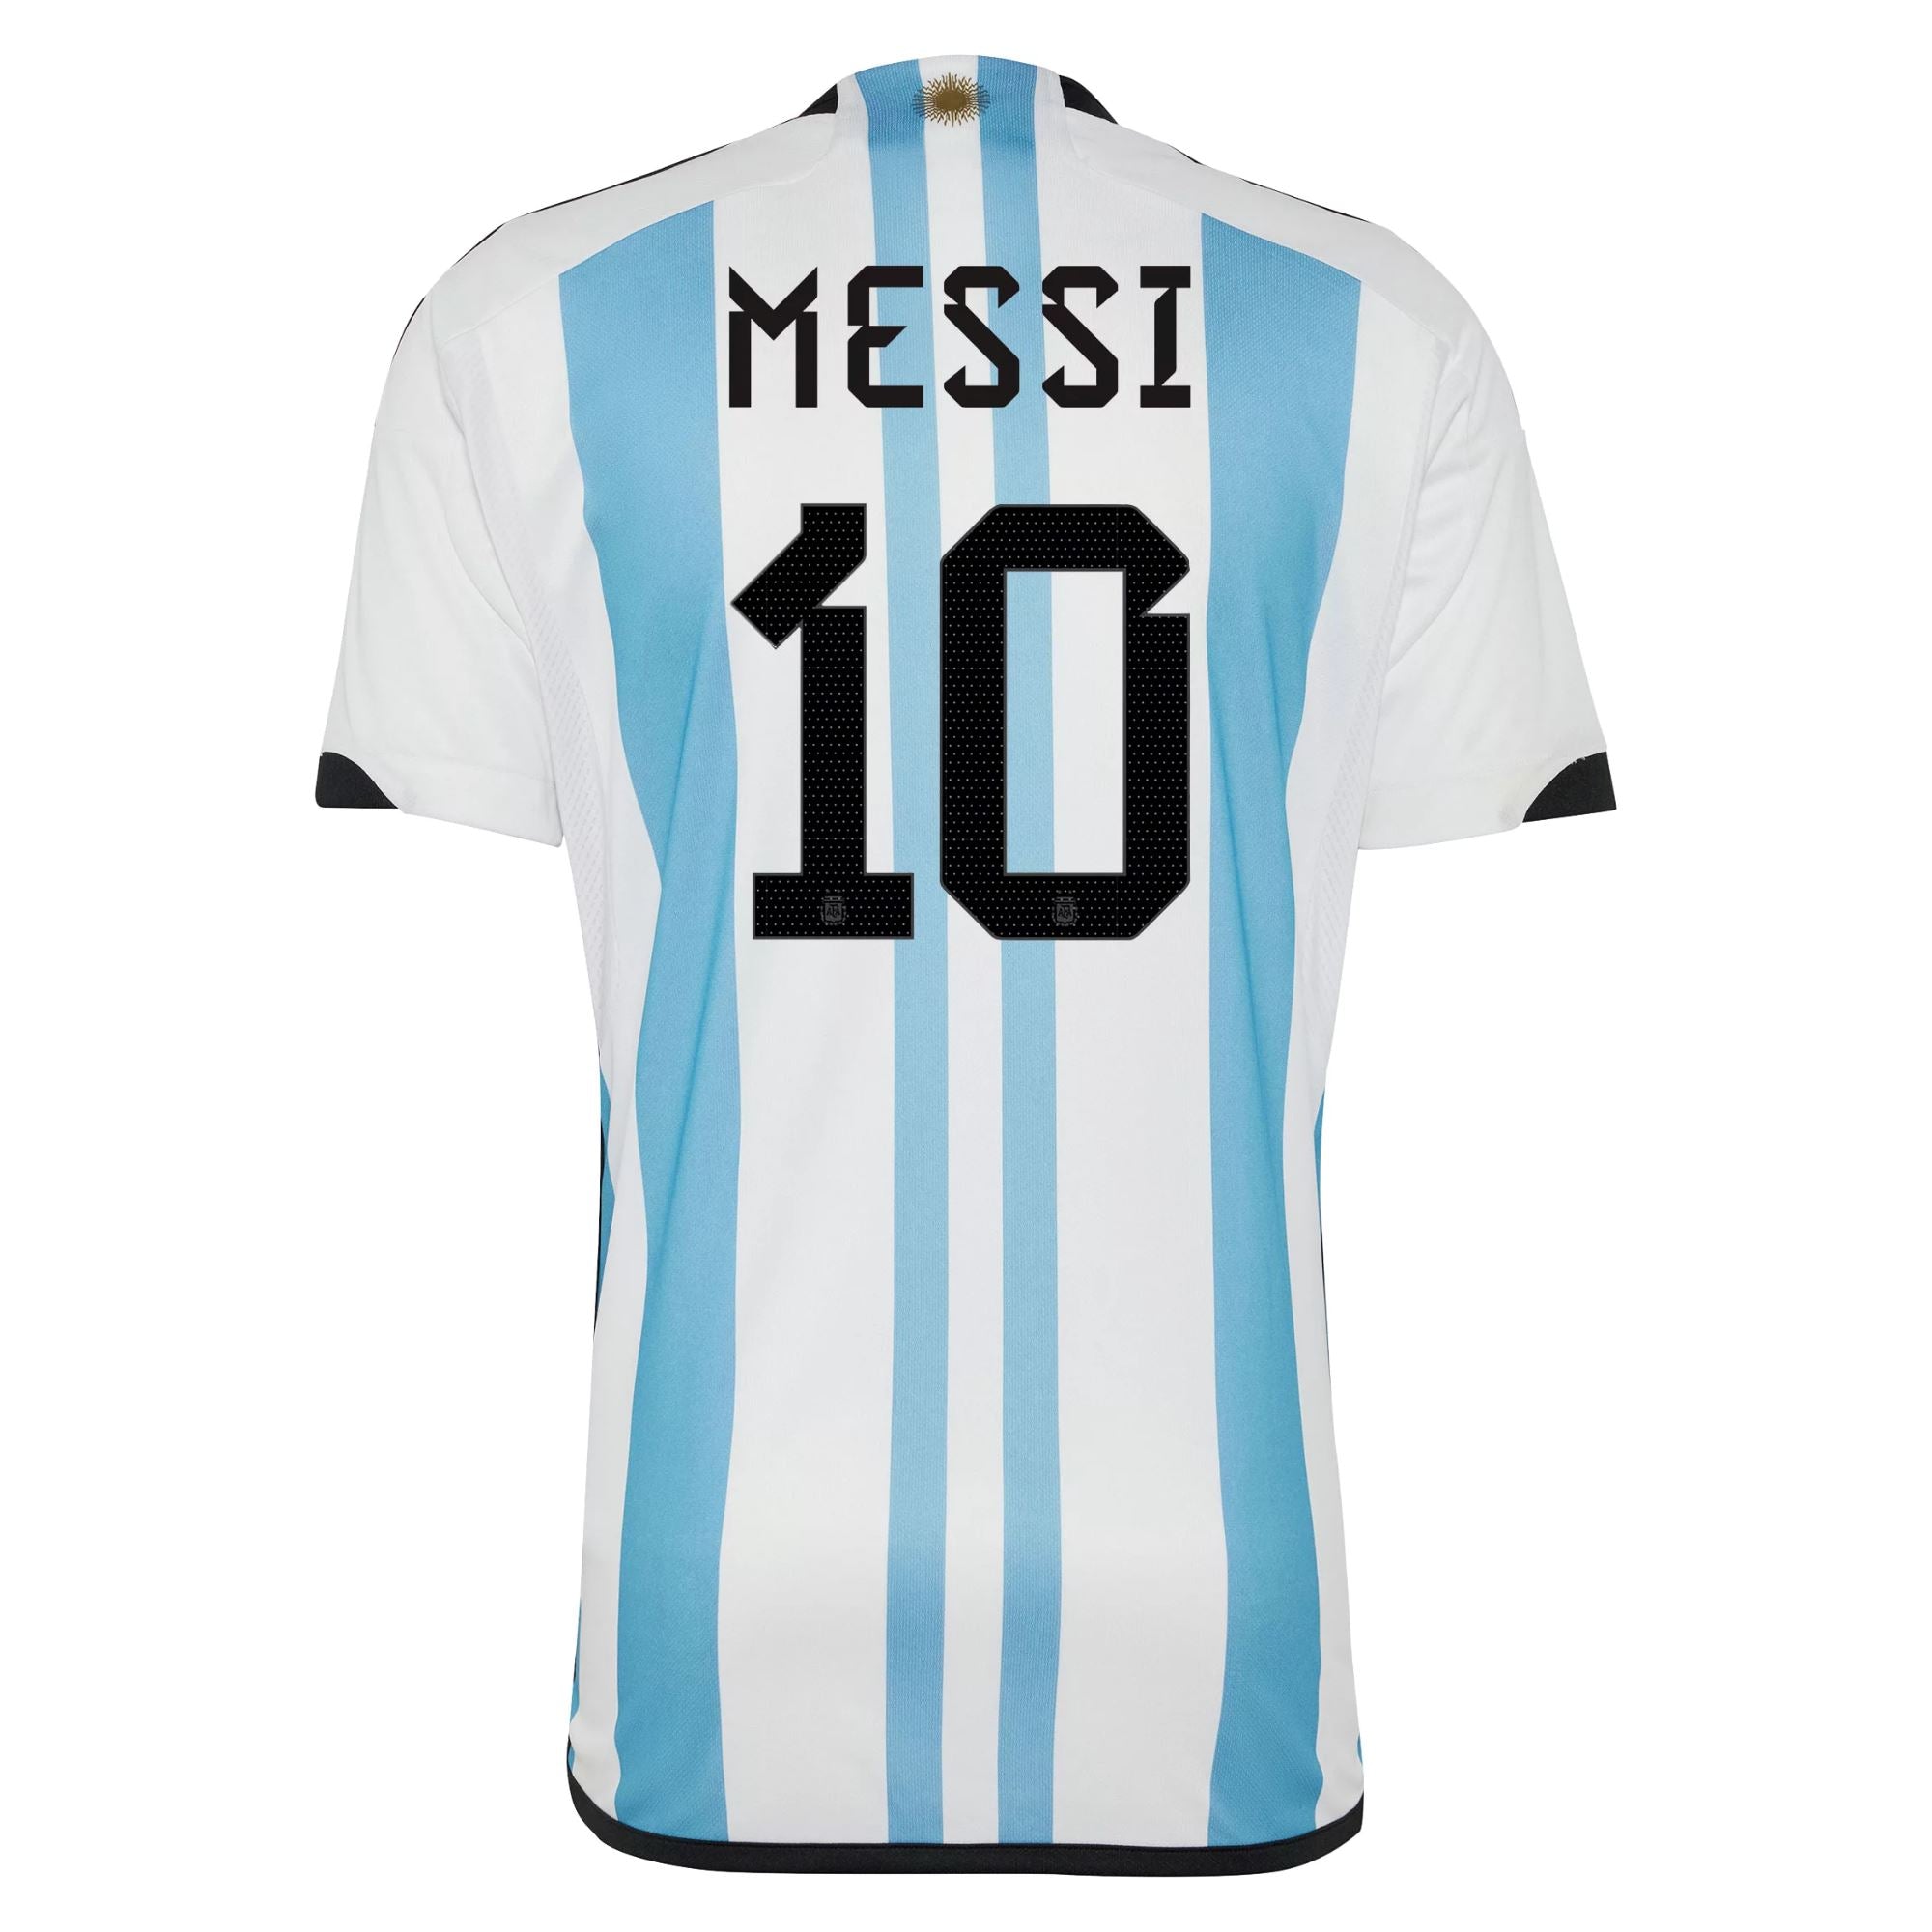 Argentina Messi Jersey 22/23  Argentina World Cup Messi Jersey